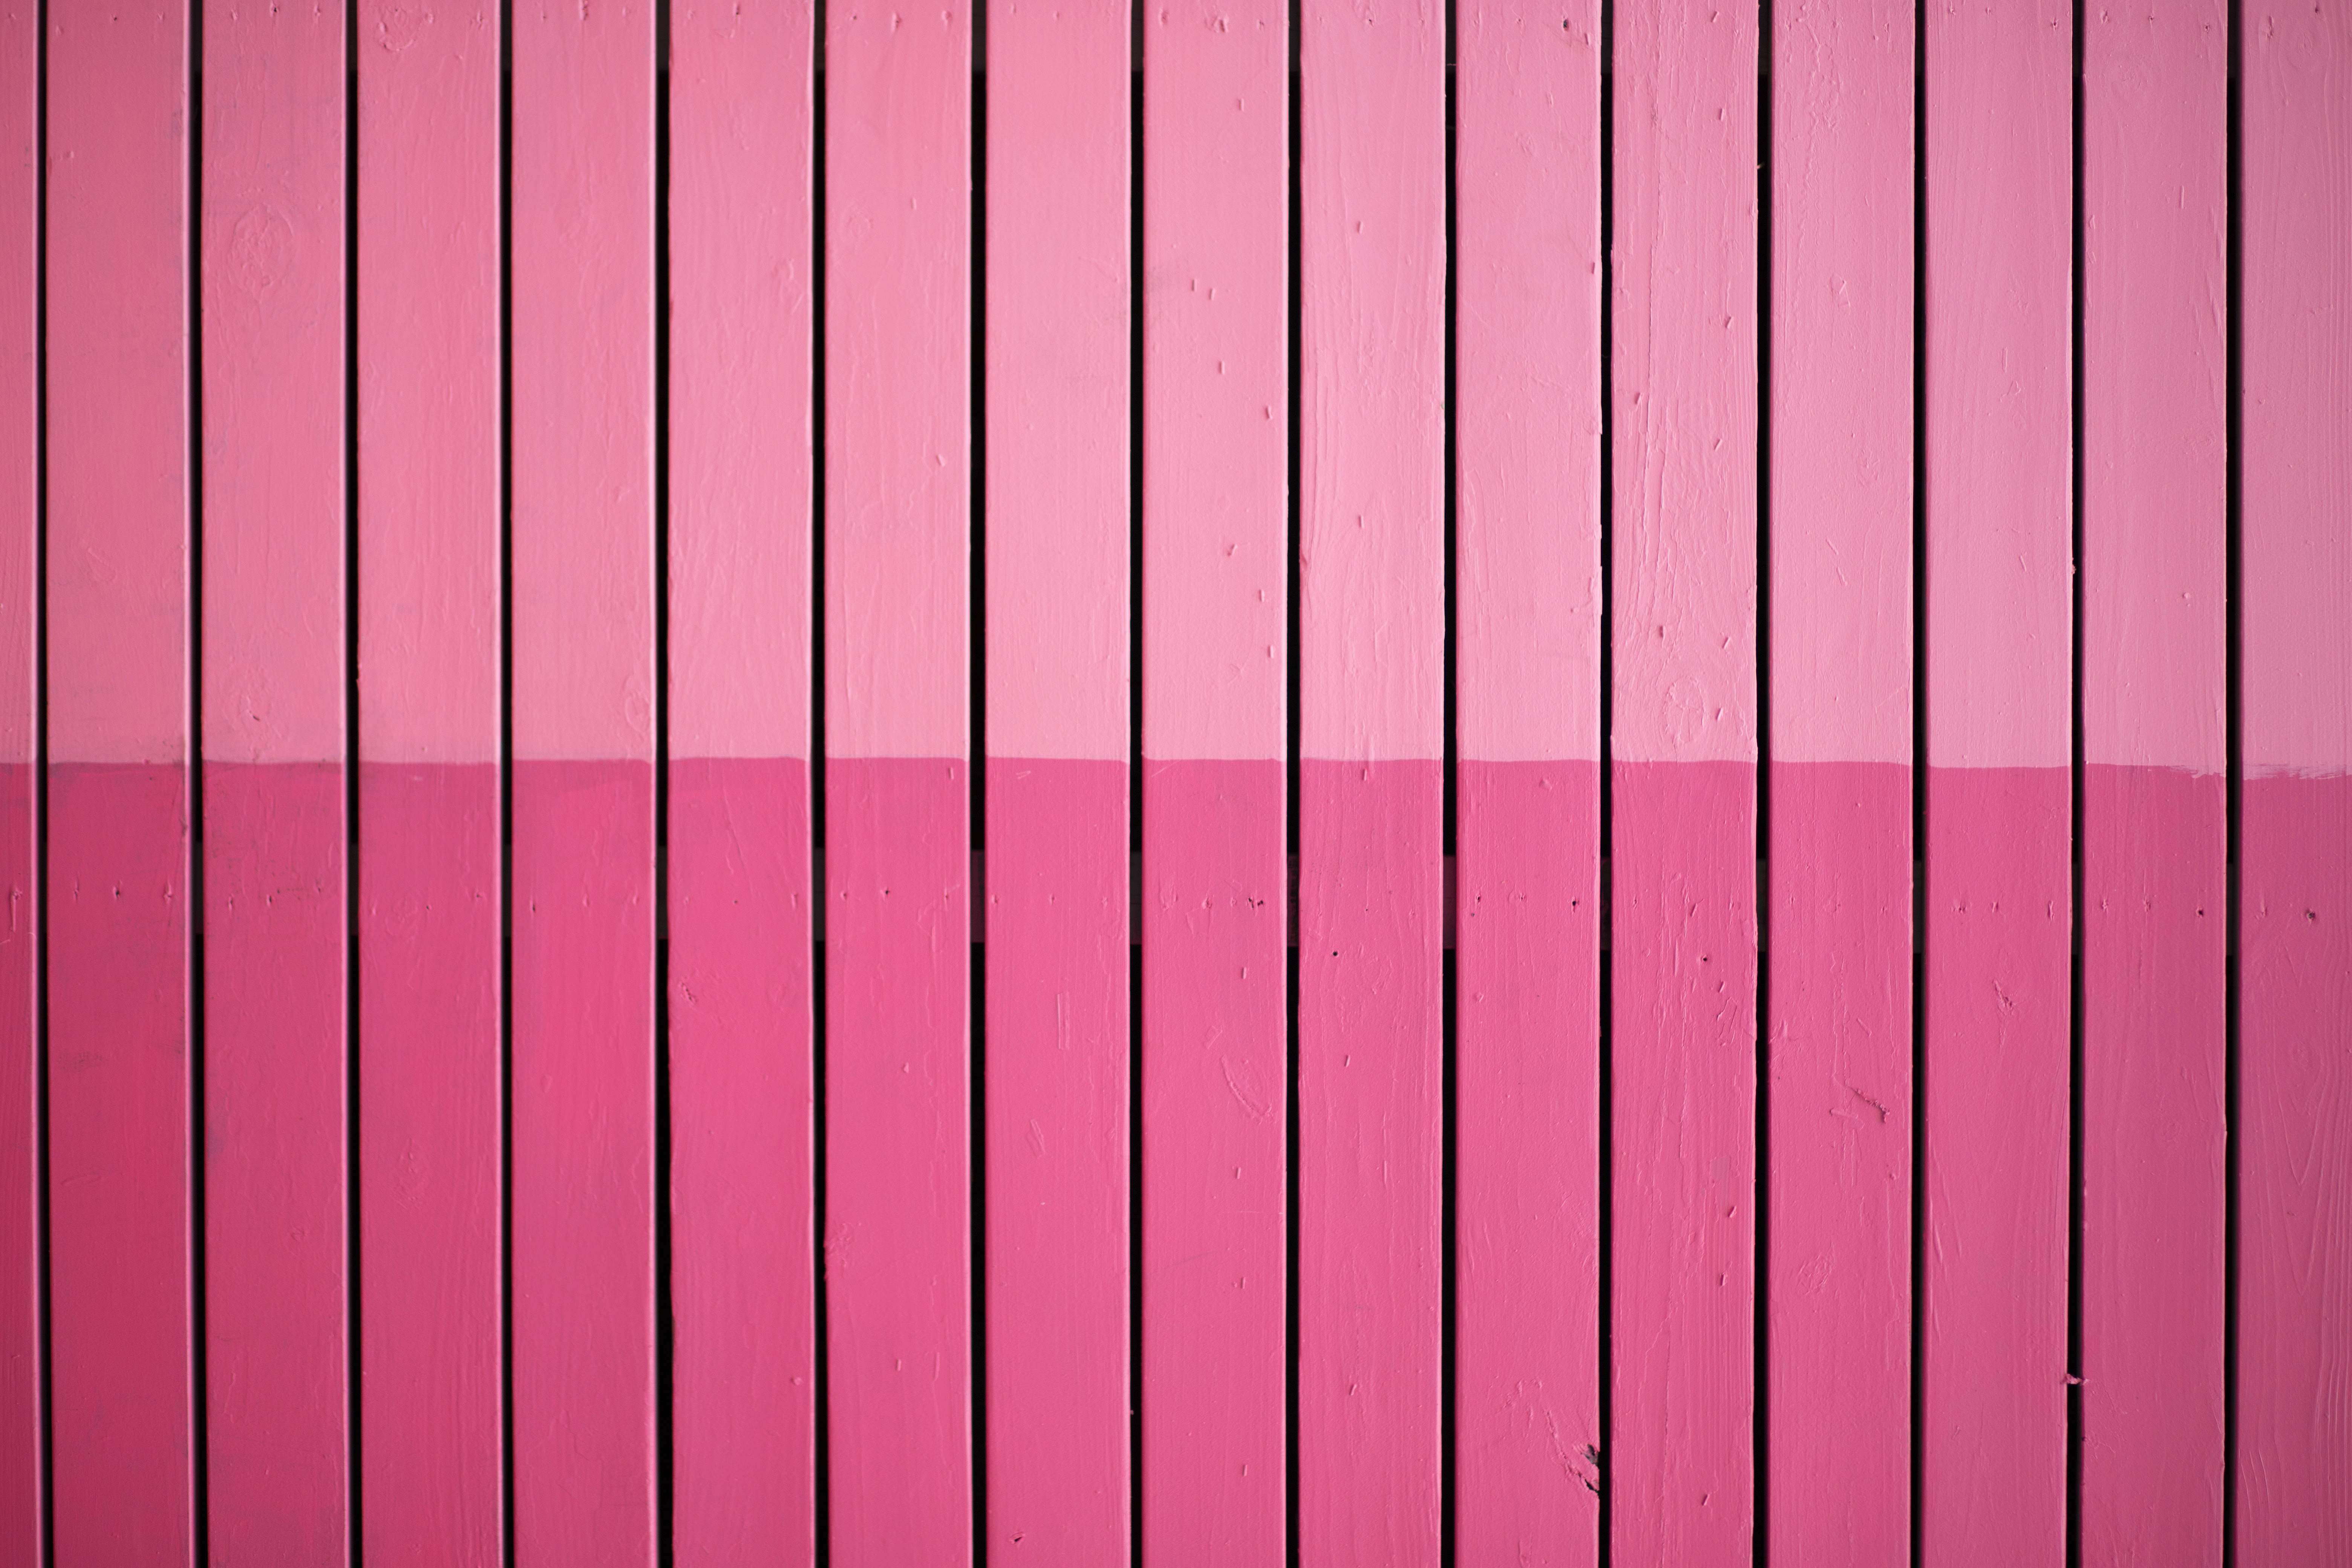 Texture Closeup Photo Of Pink Paint Plank Wall Background Image - Free ...